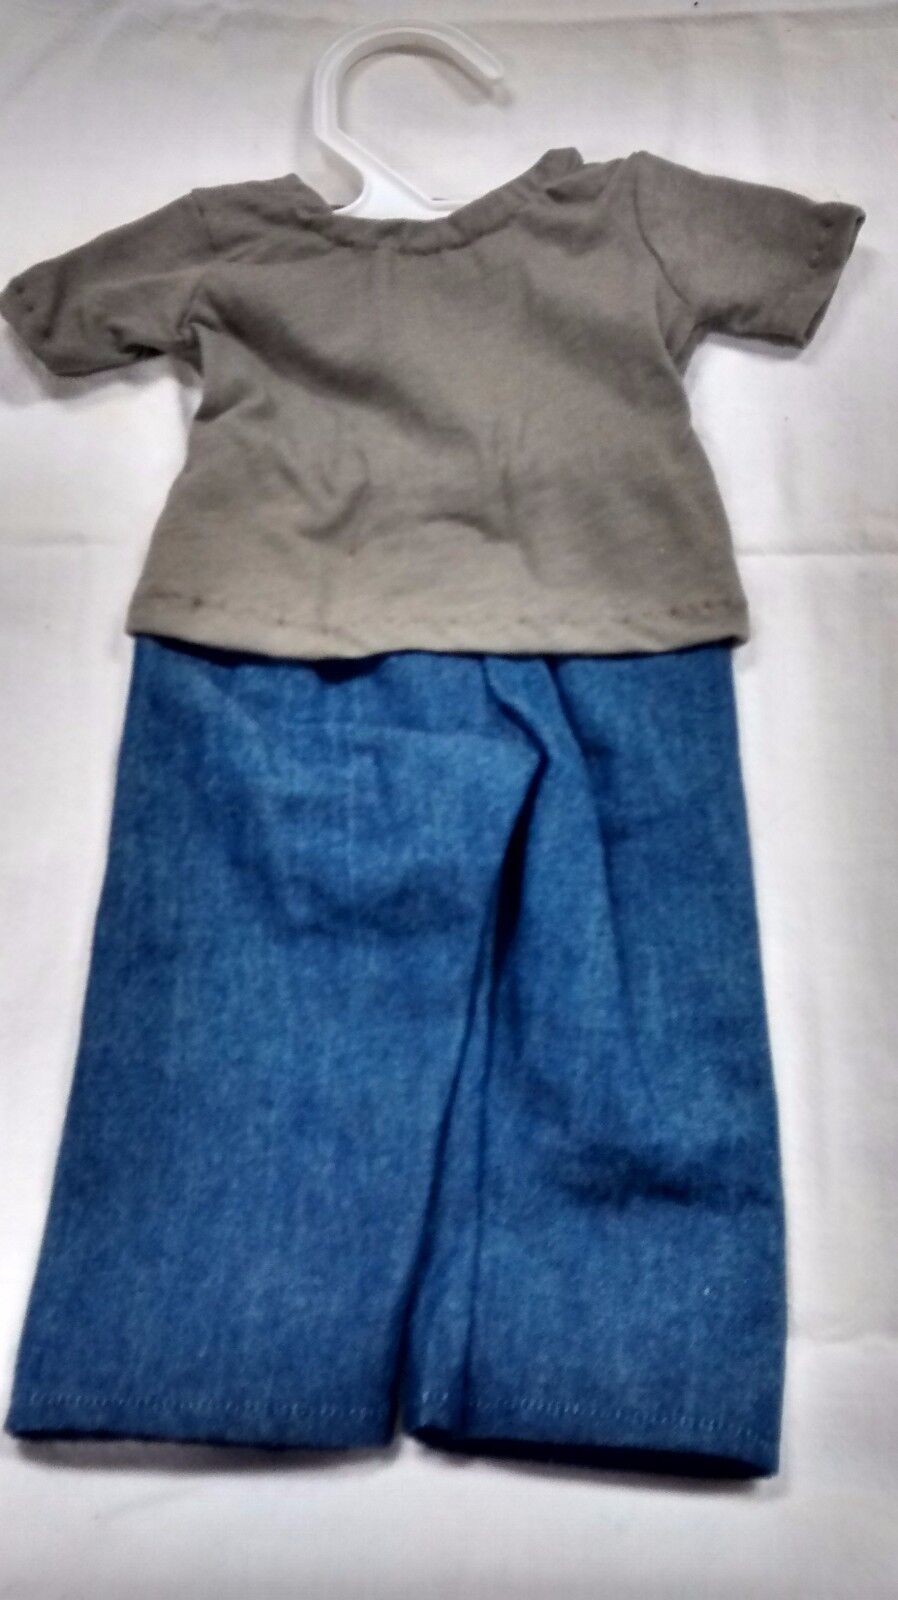 jeans olive green t shirt fit American Girl Boy doll Logan handmade and new